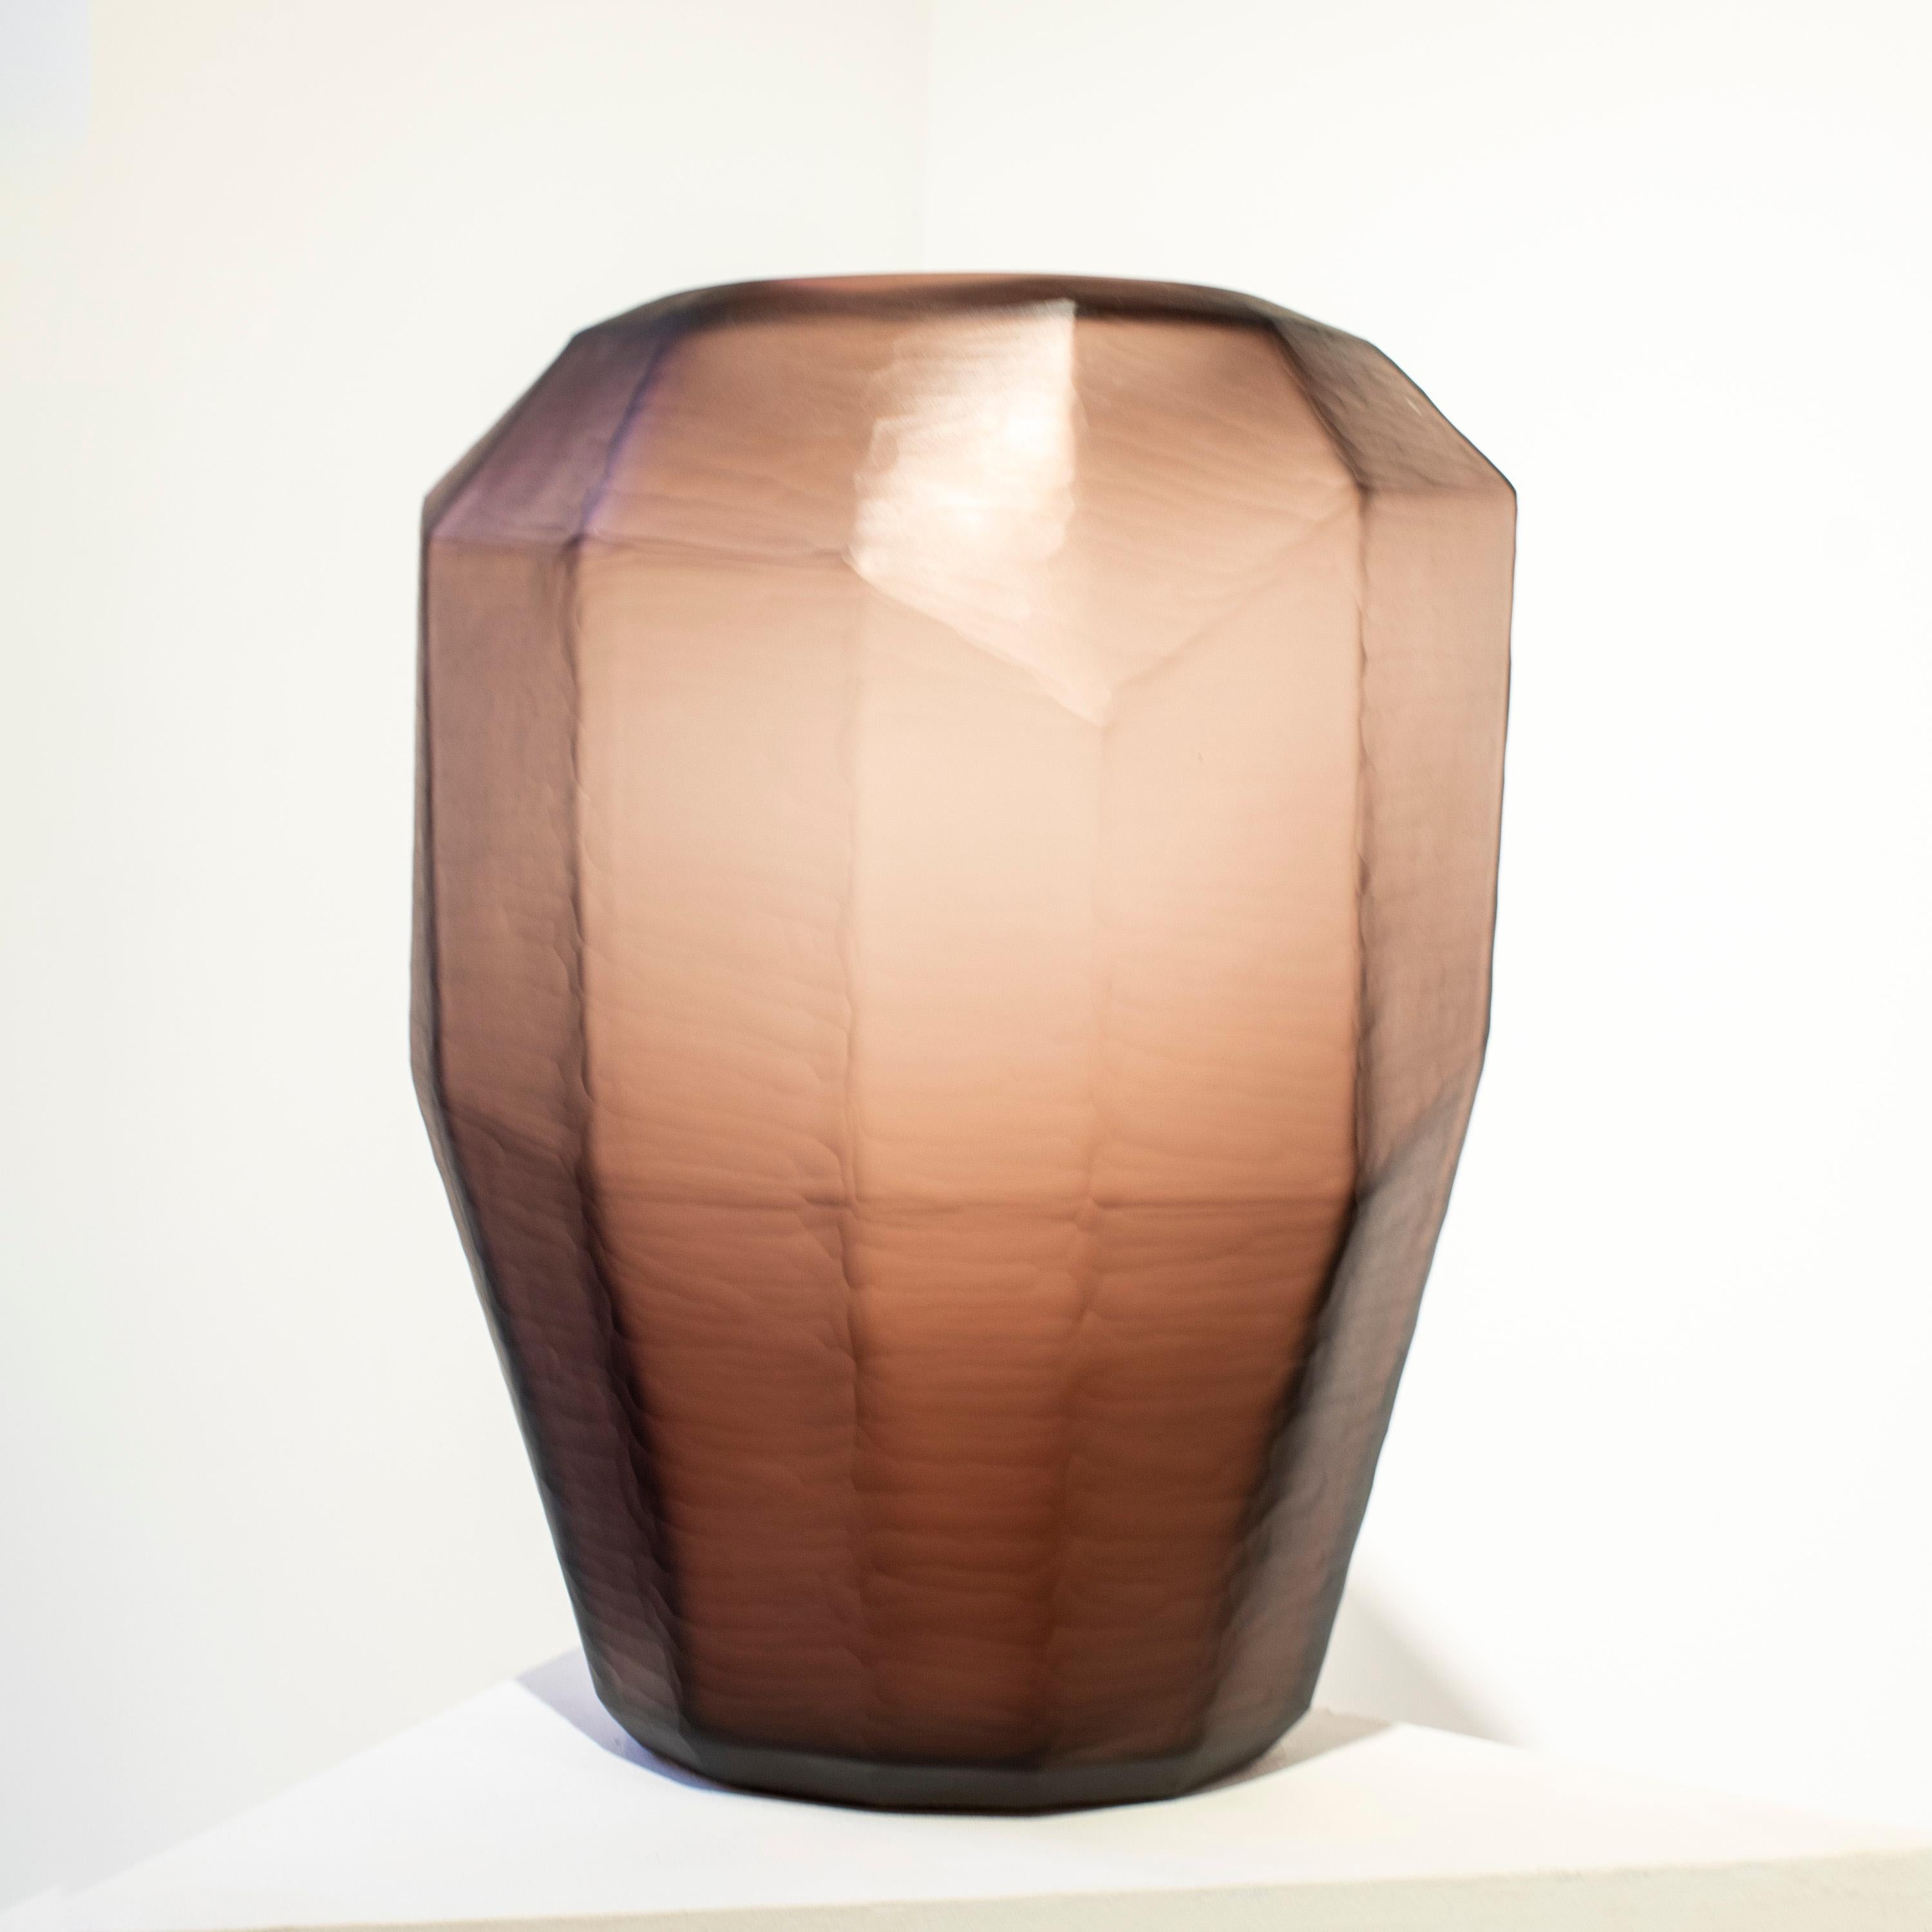 Italian magenta translucid glass vase, with faceted polygonal shape and a matted finish. 